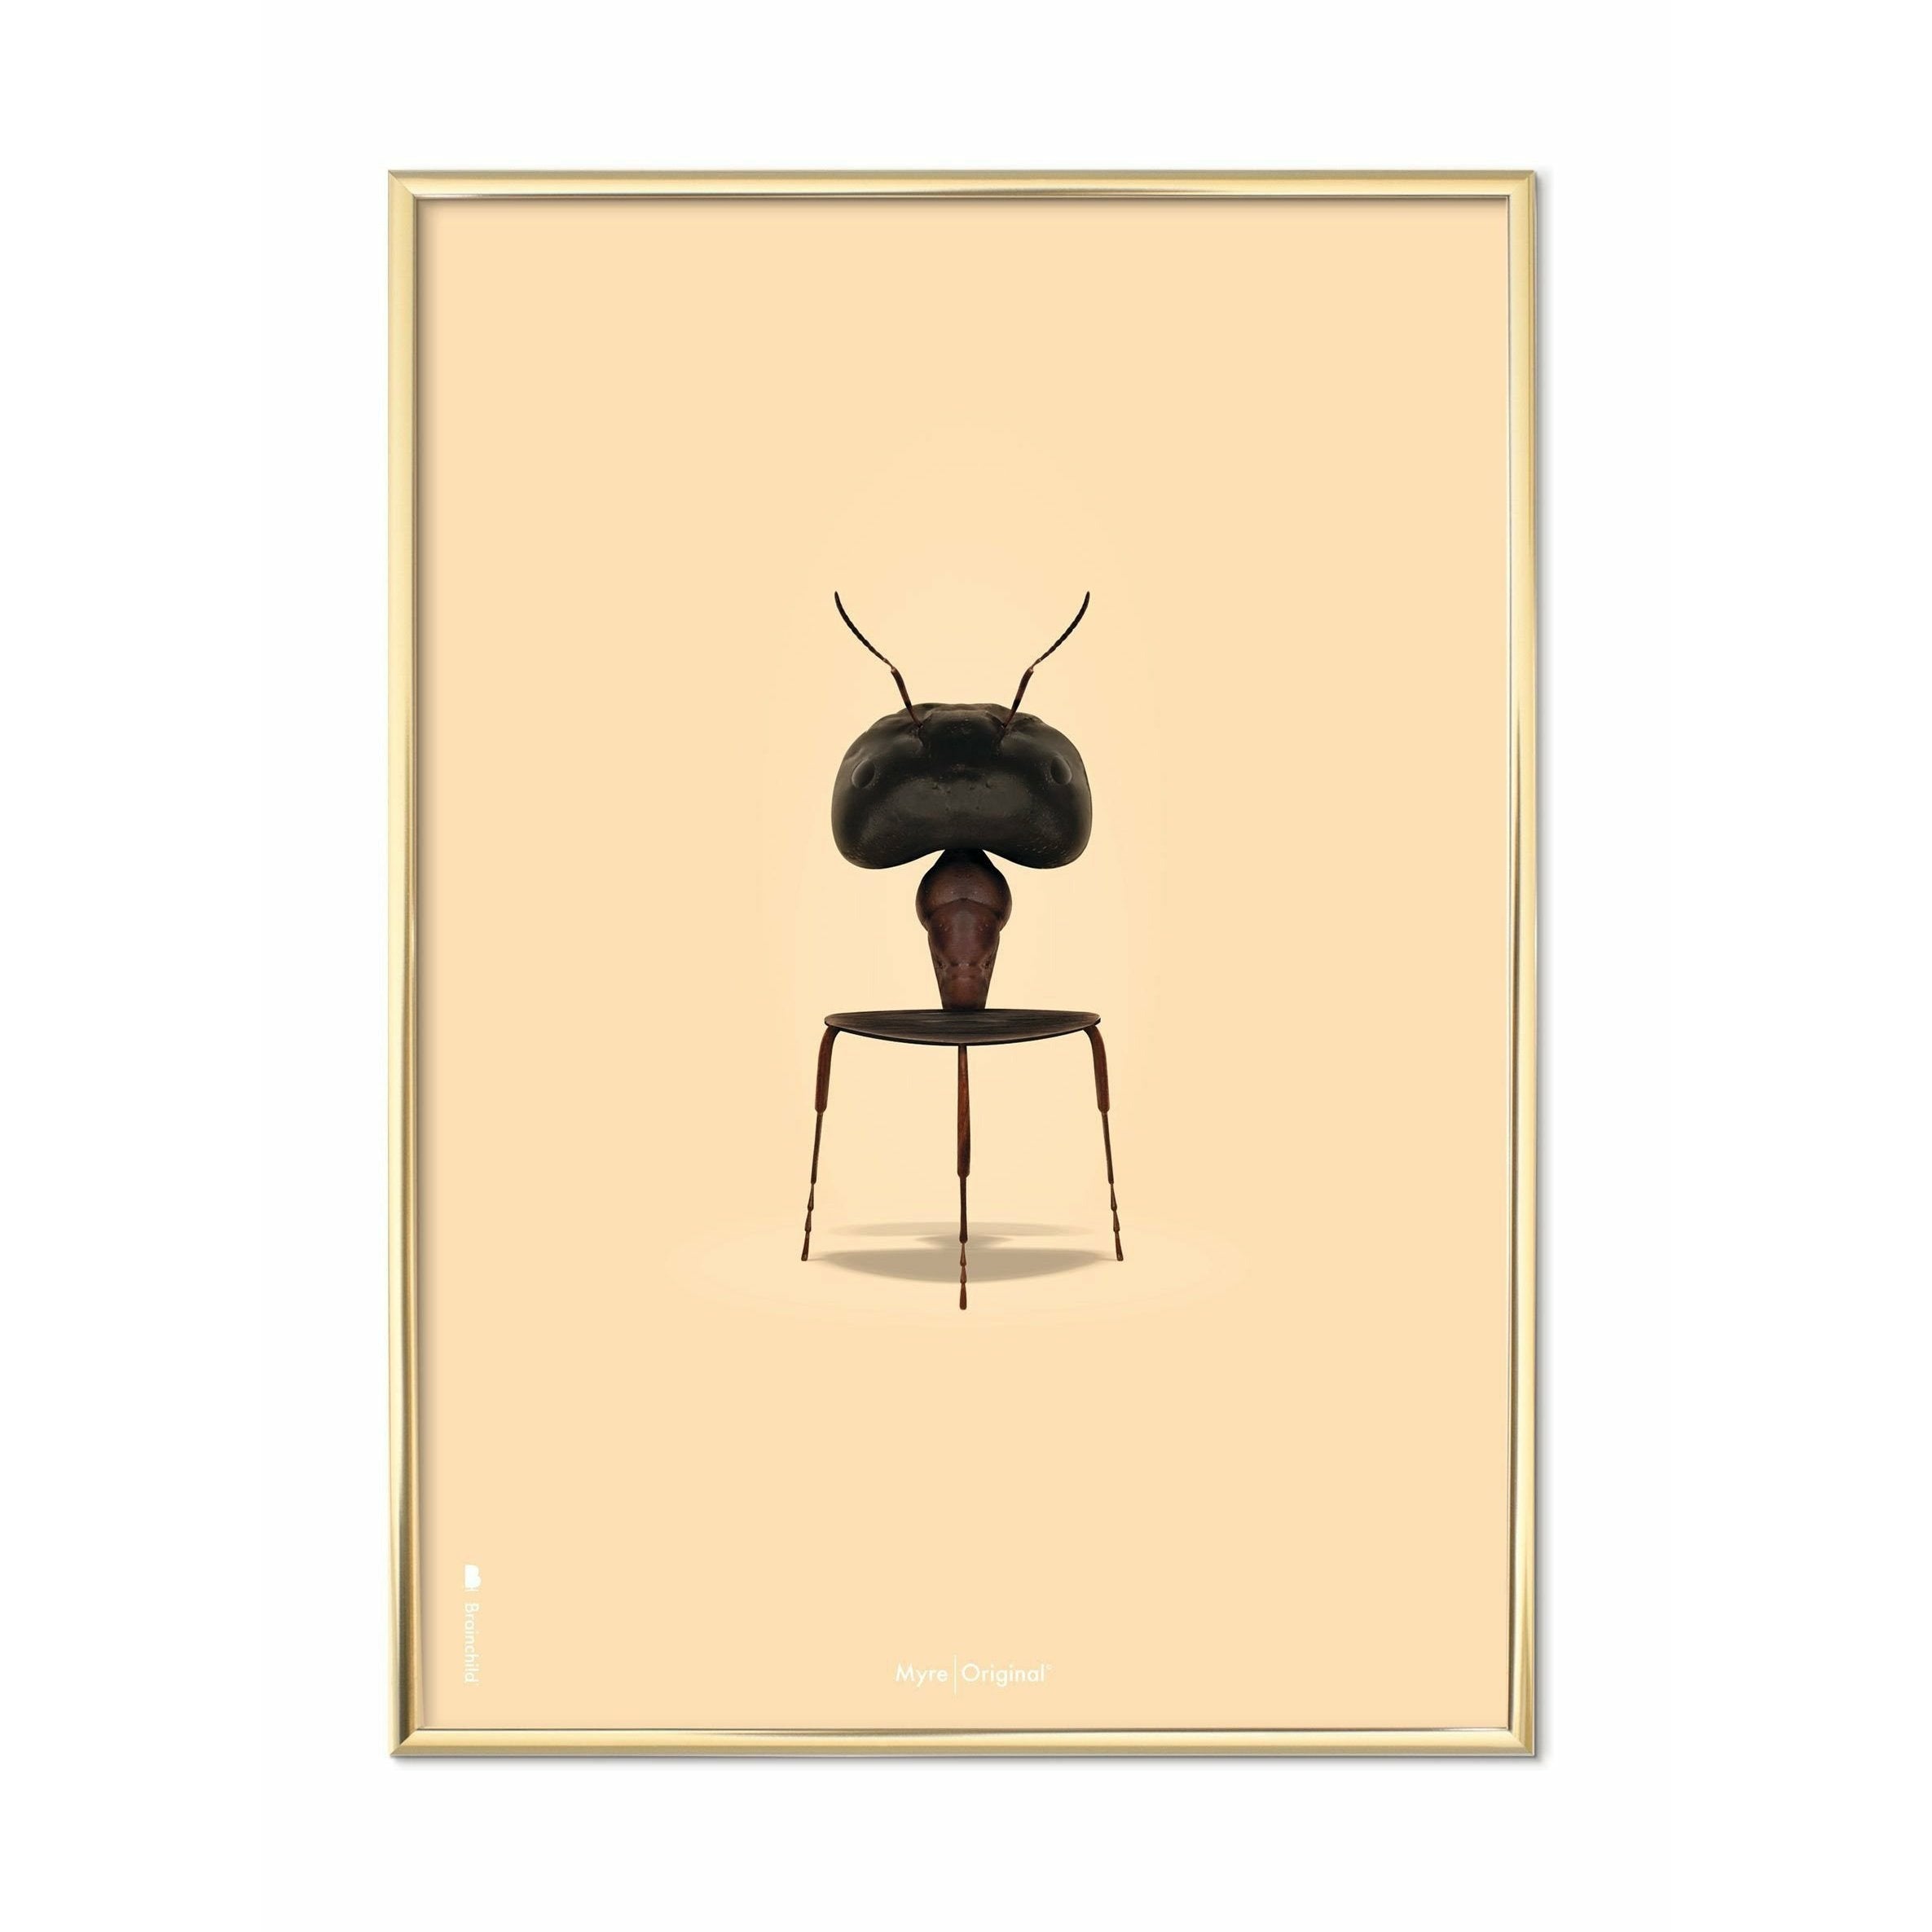 Brainchild Ant Classic Poster, Brass Frame 30x40 Cm, Sand Colored Background